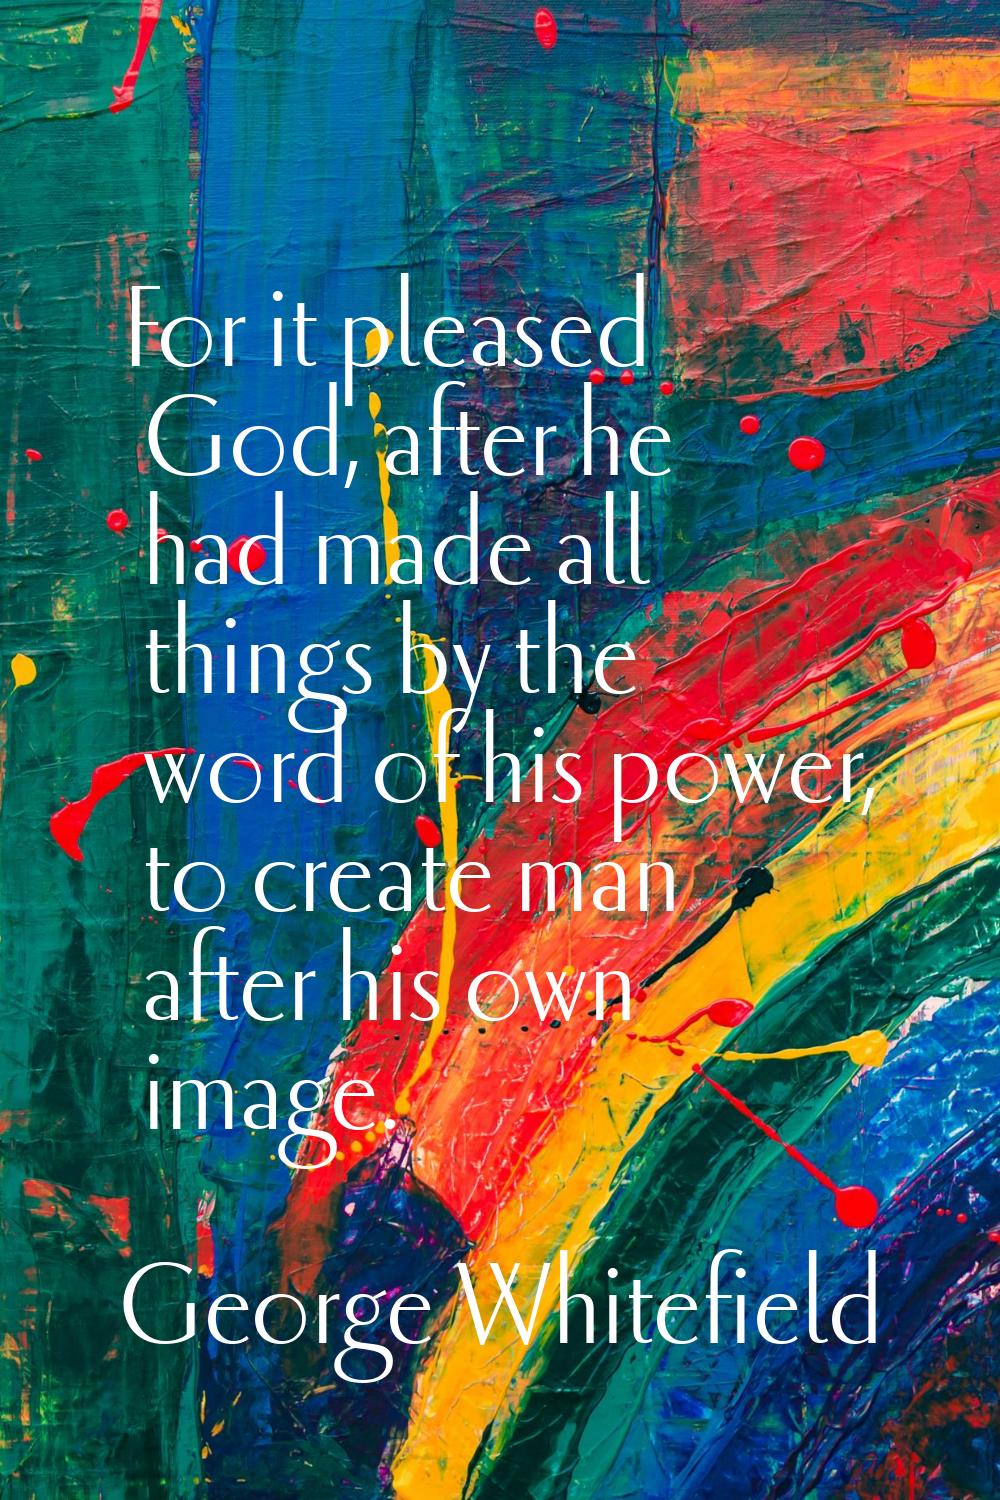 For it pleased God, after he had made all things by the word of his power, to create man after his 